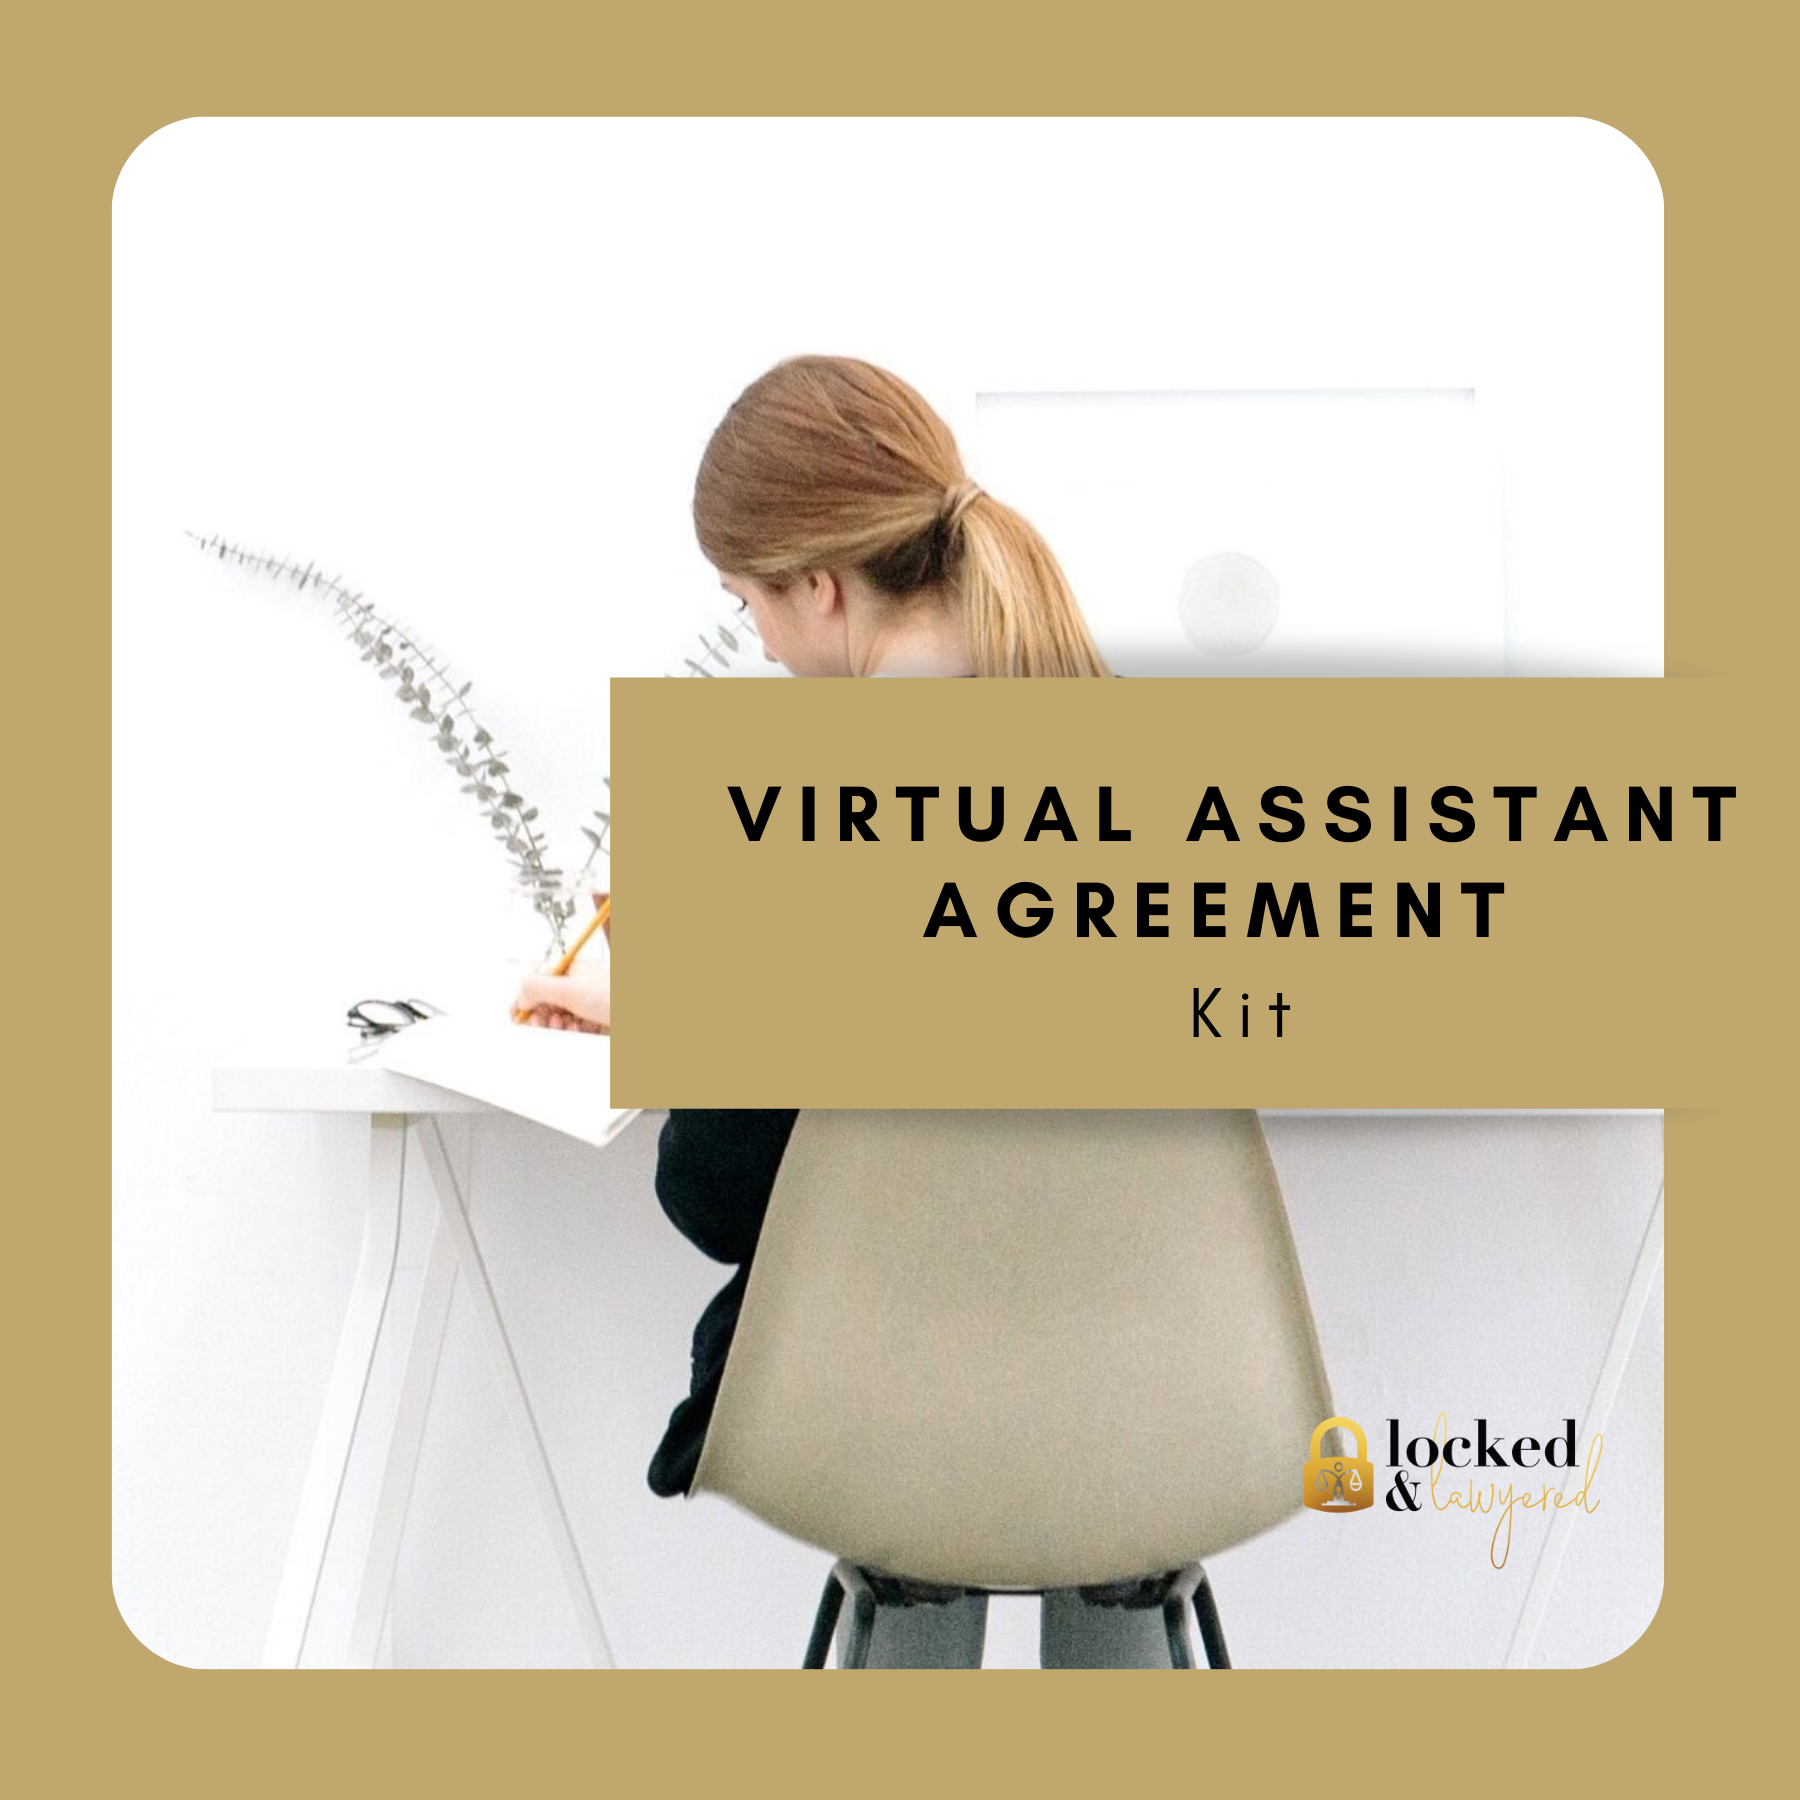 Virtual Assistant Agreement Kit